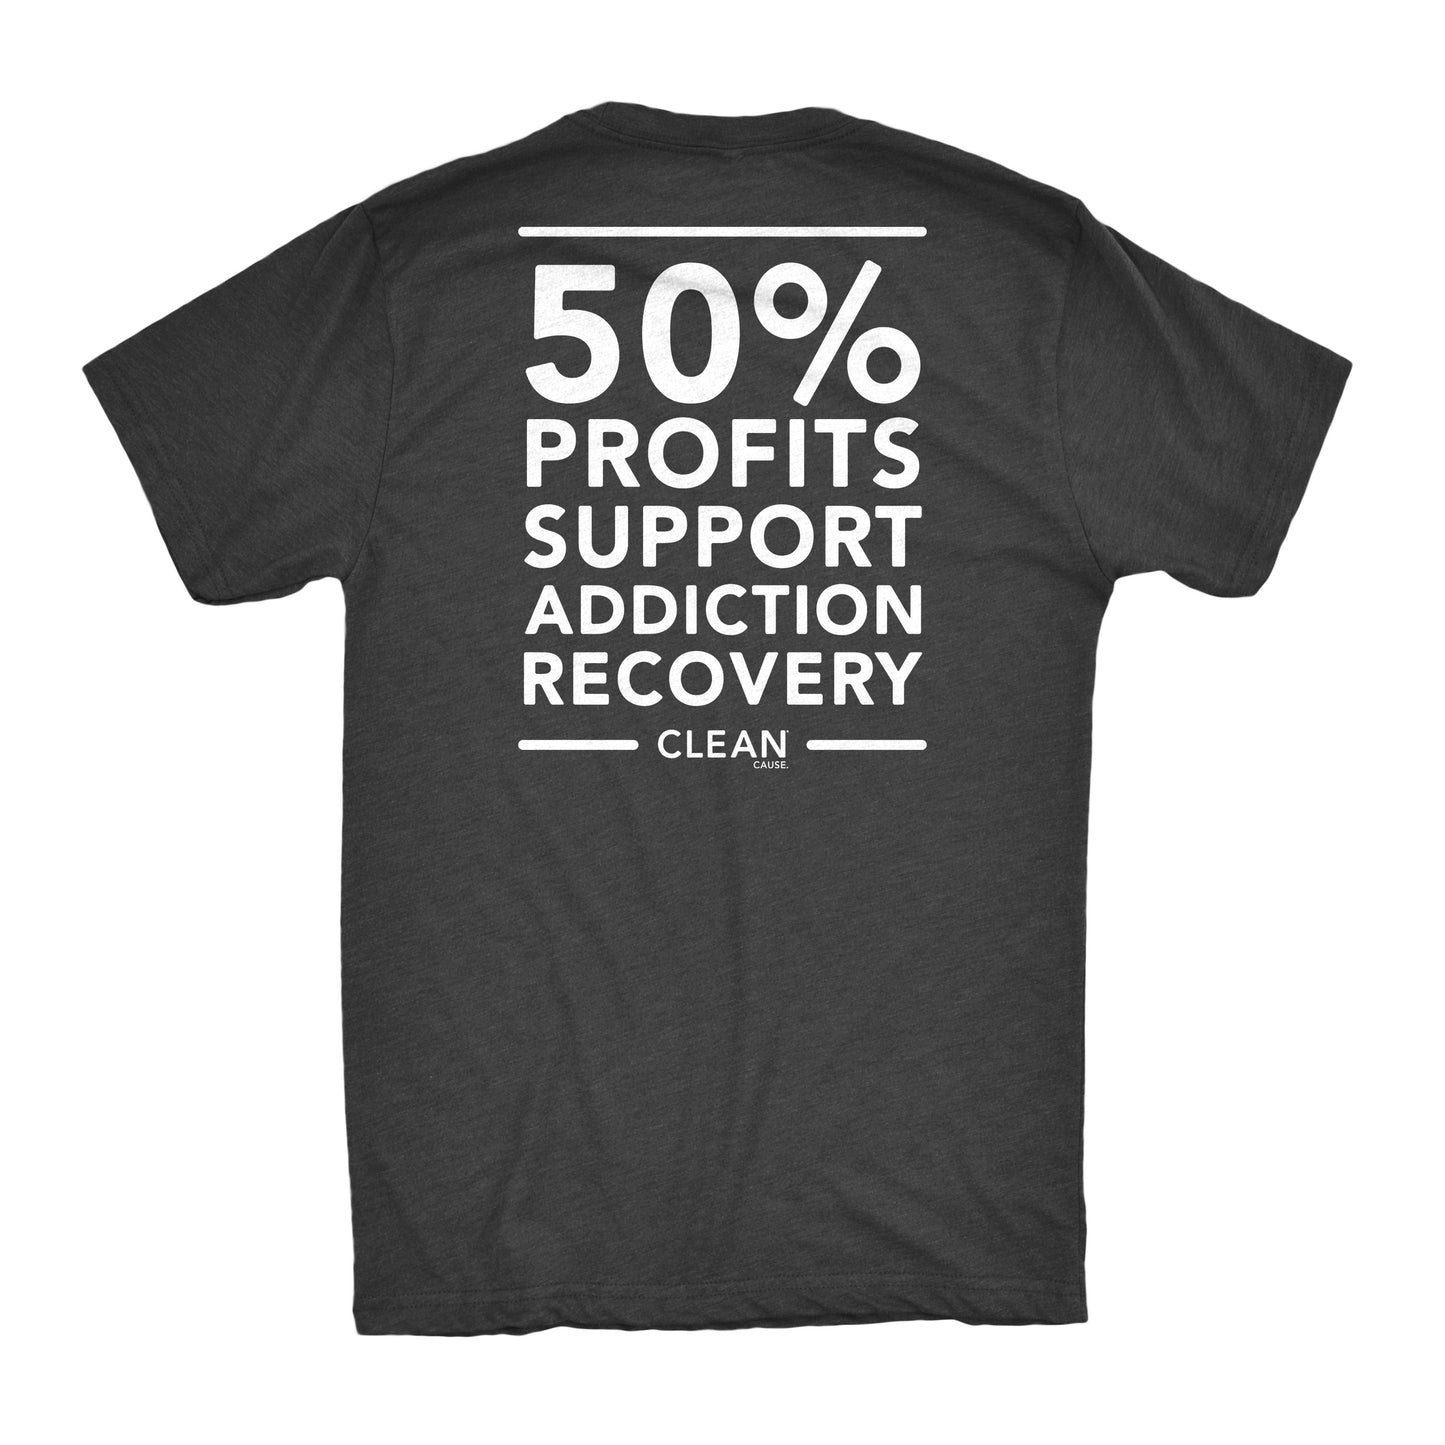 Grey t-shirt with white text "50% profits support addiction recovery. CLEAN Cause"